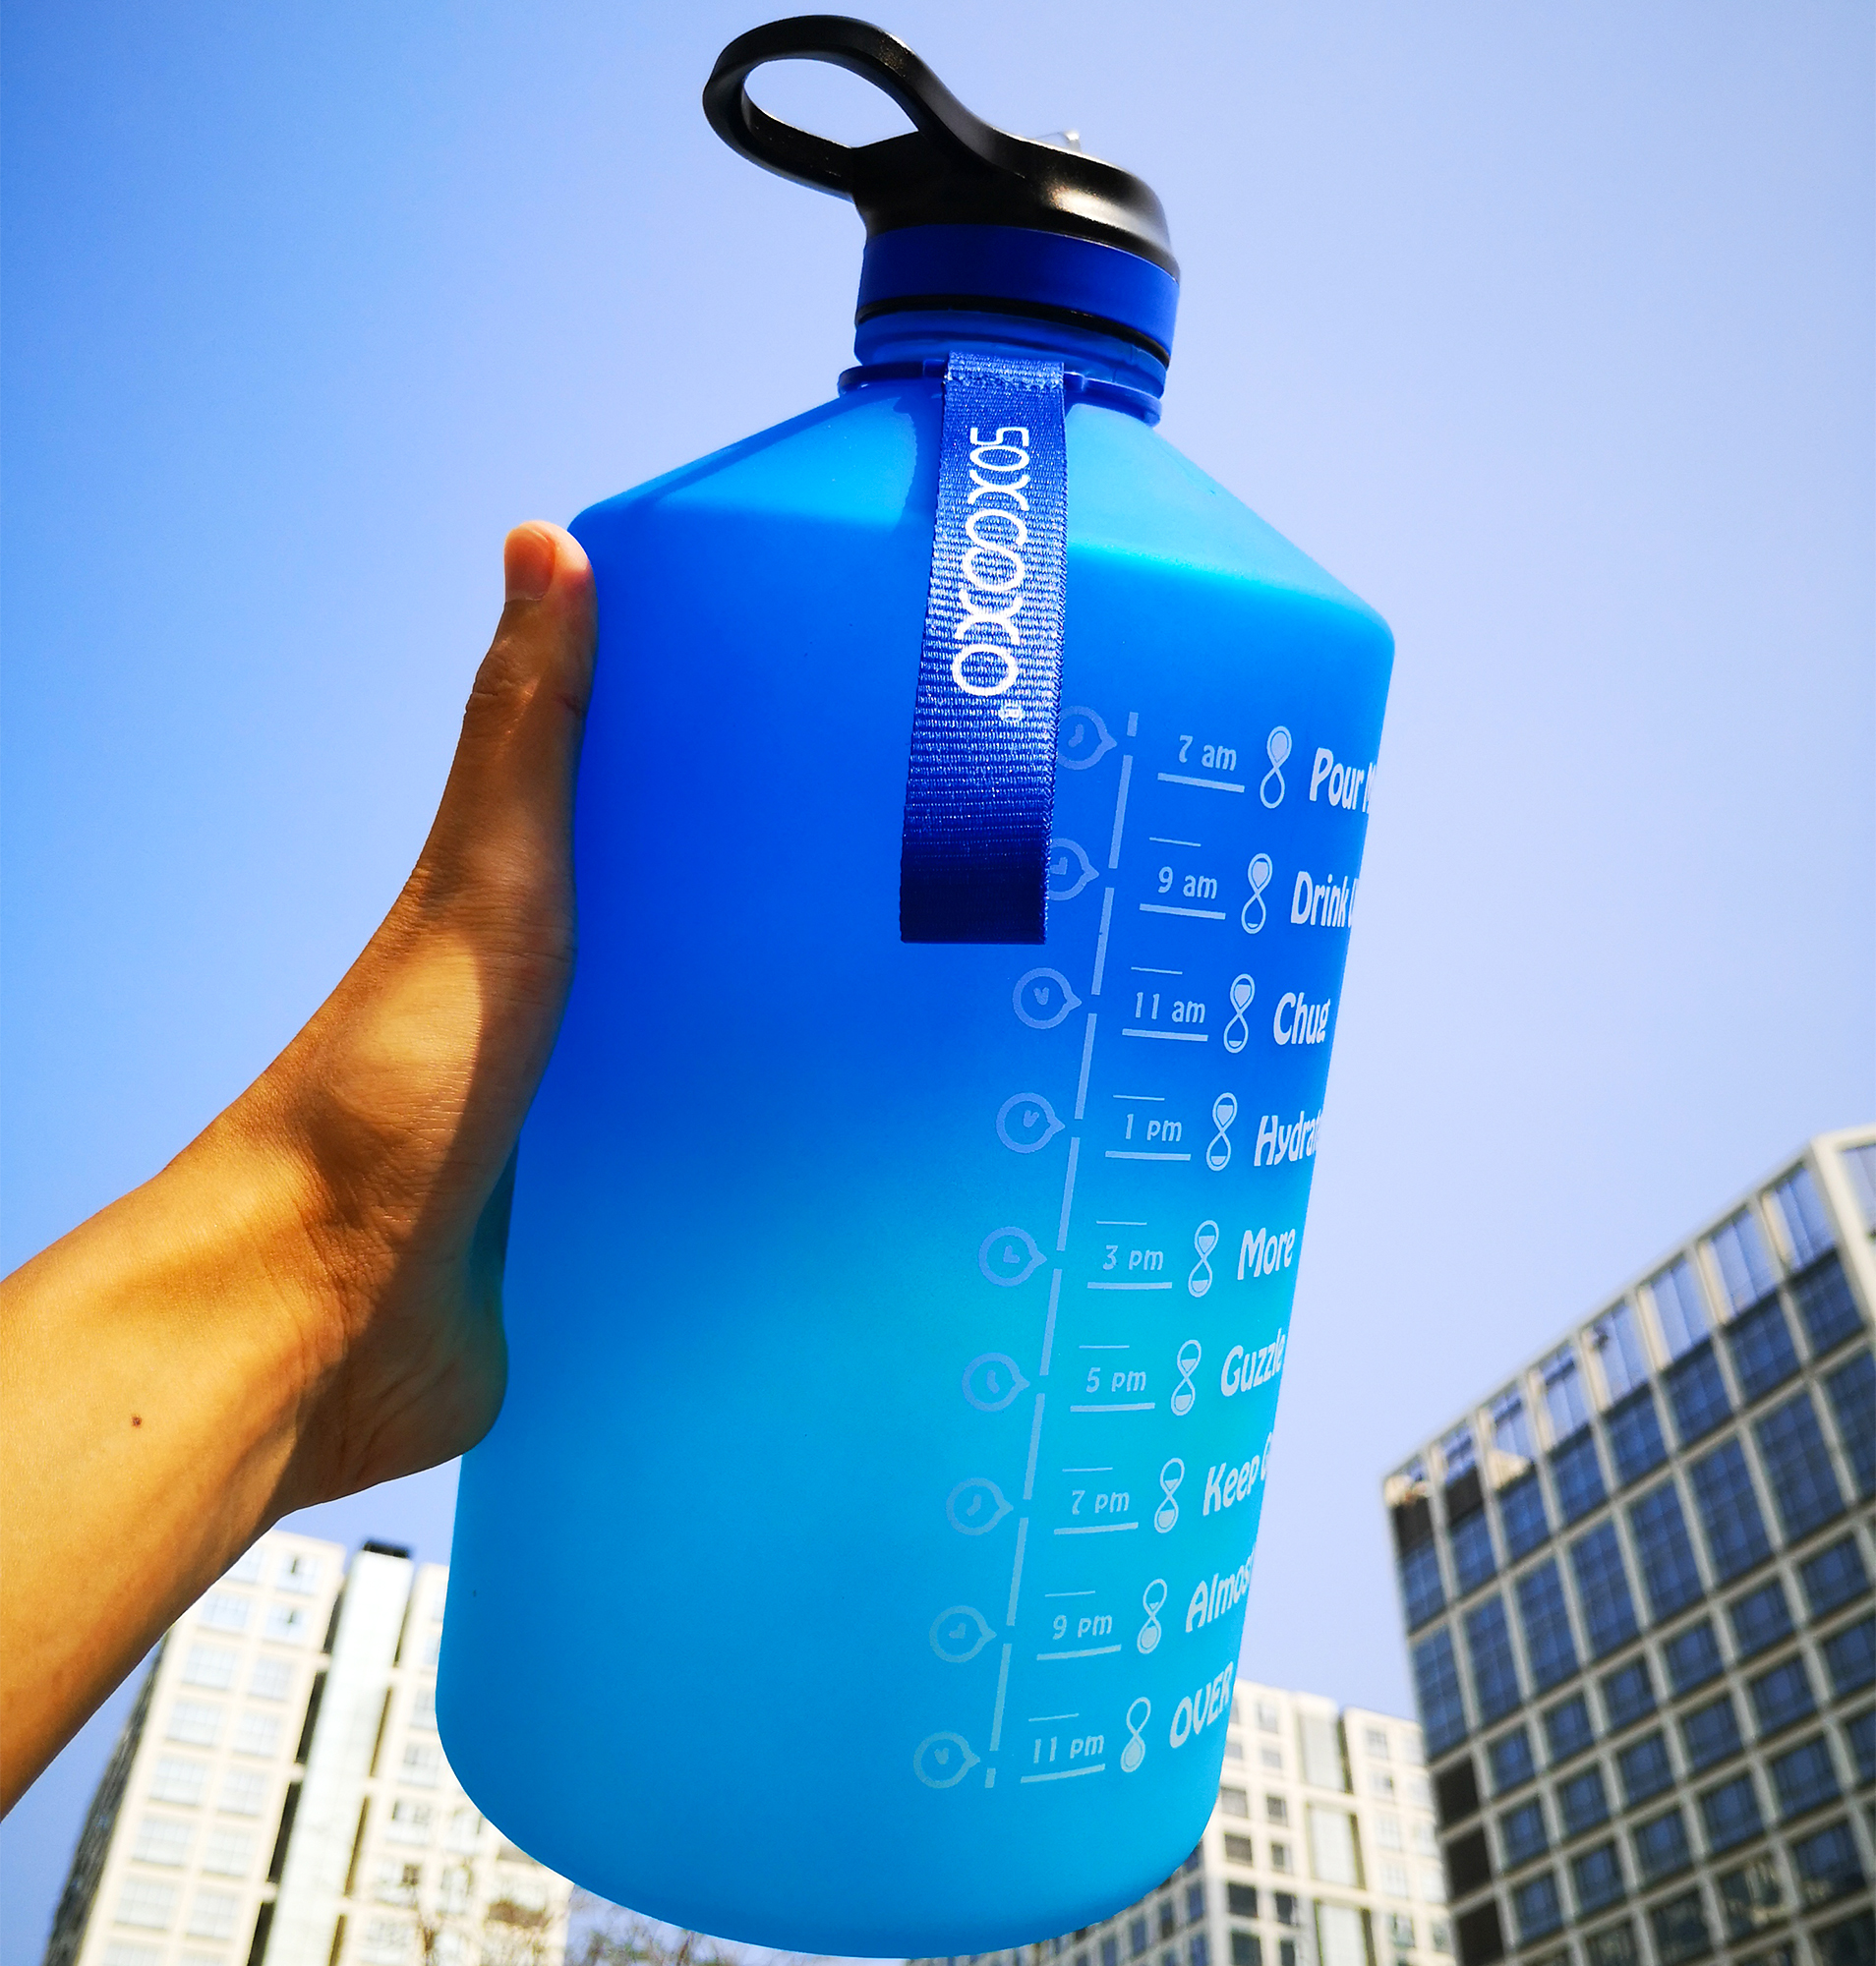 1 Gallon Motivational Sports Water Bottle with Time Marker Sport Water Jug  128oz